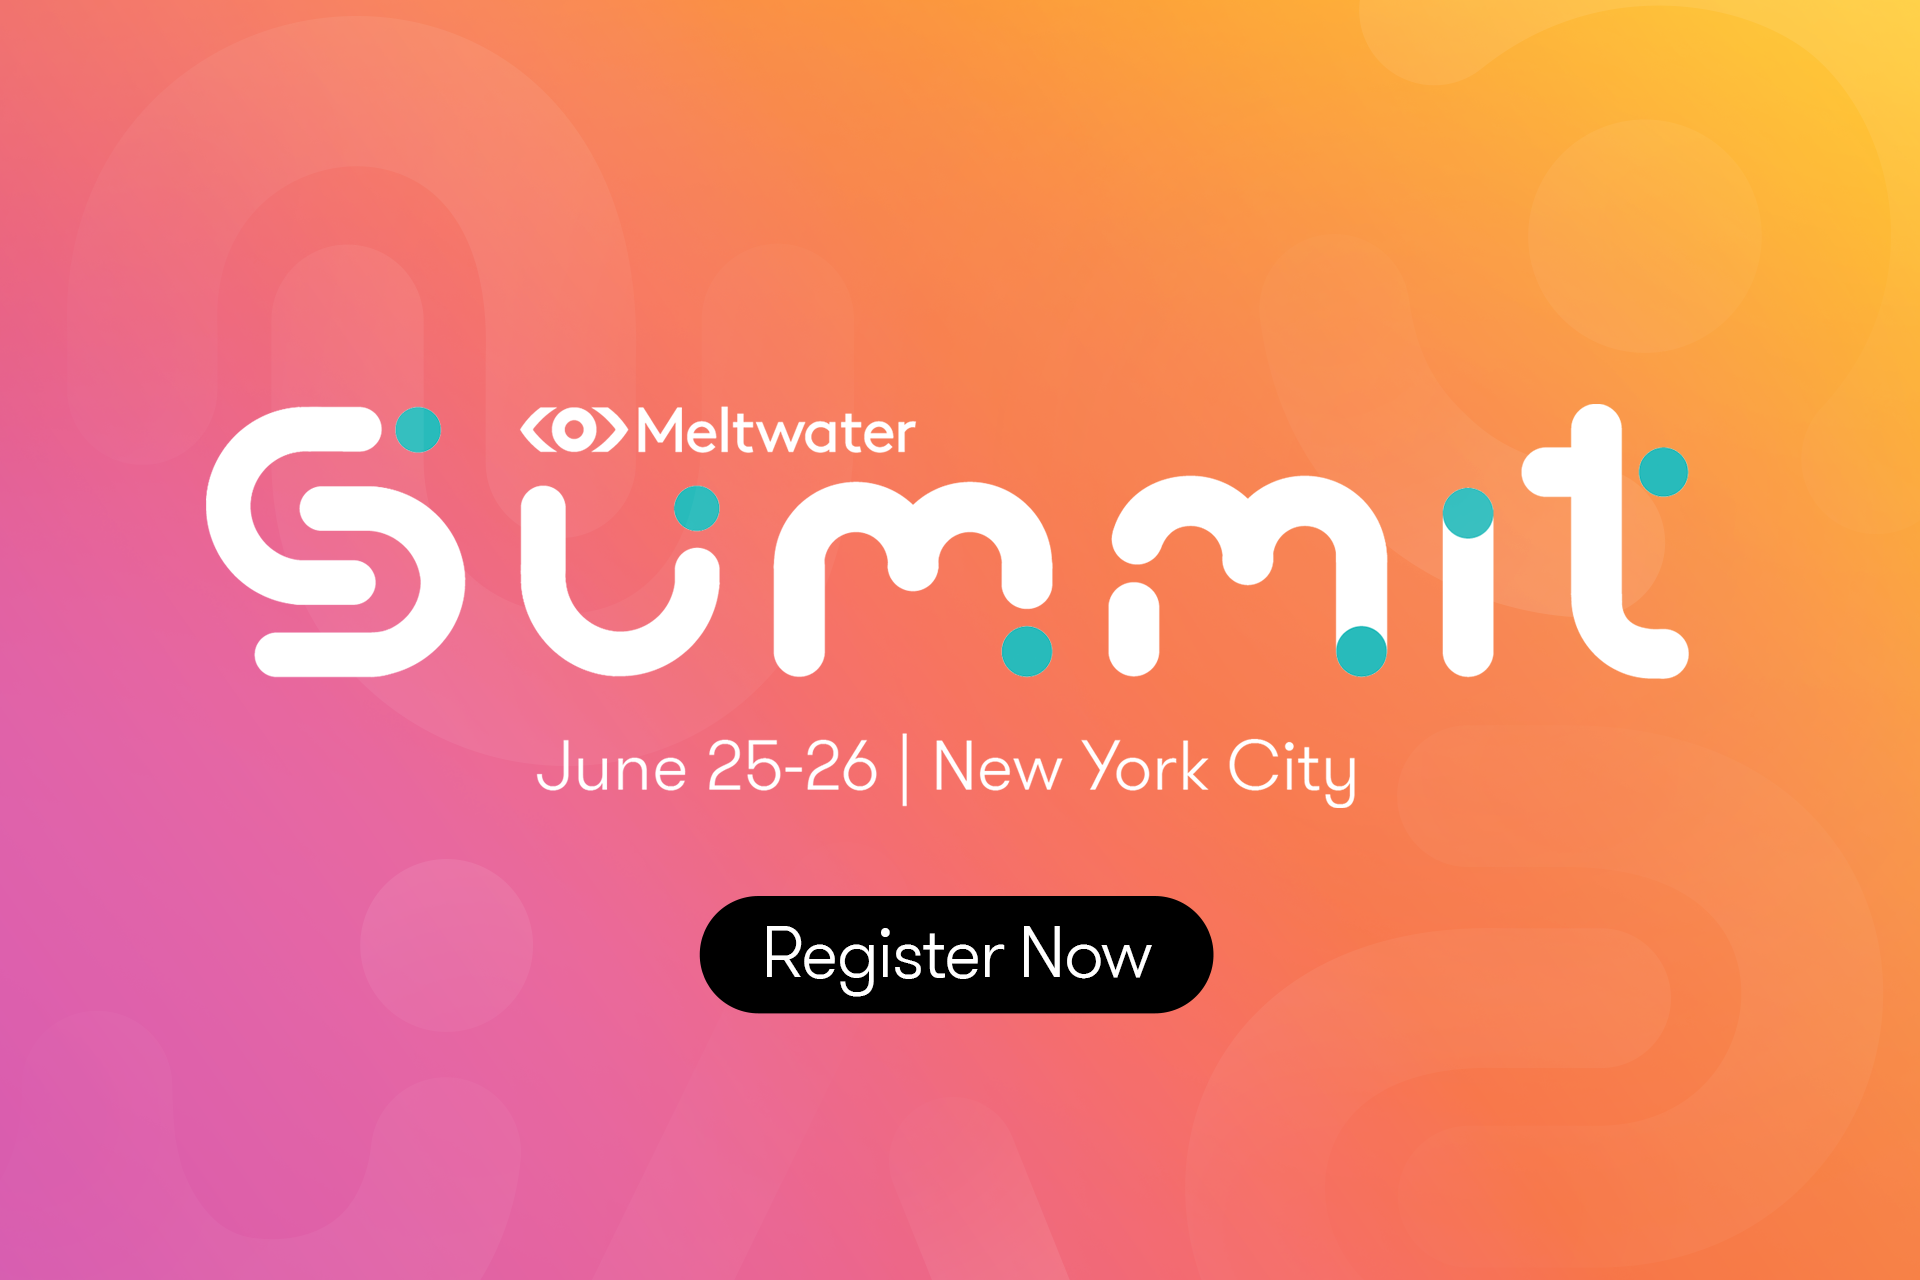 Meltwater Summit, June 25-26, NYC